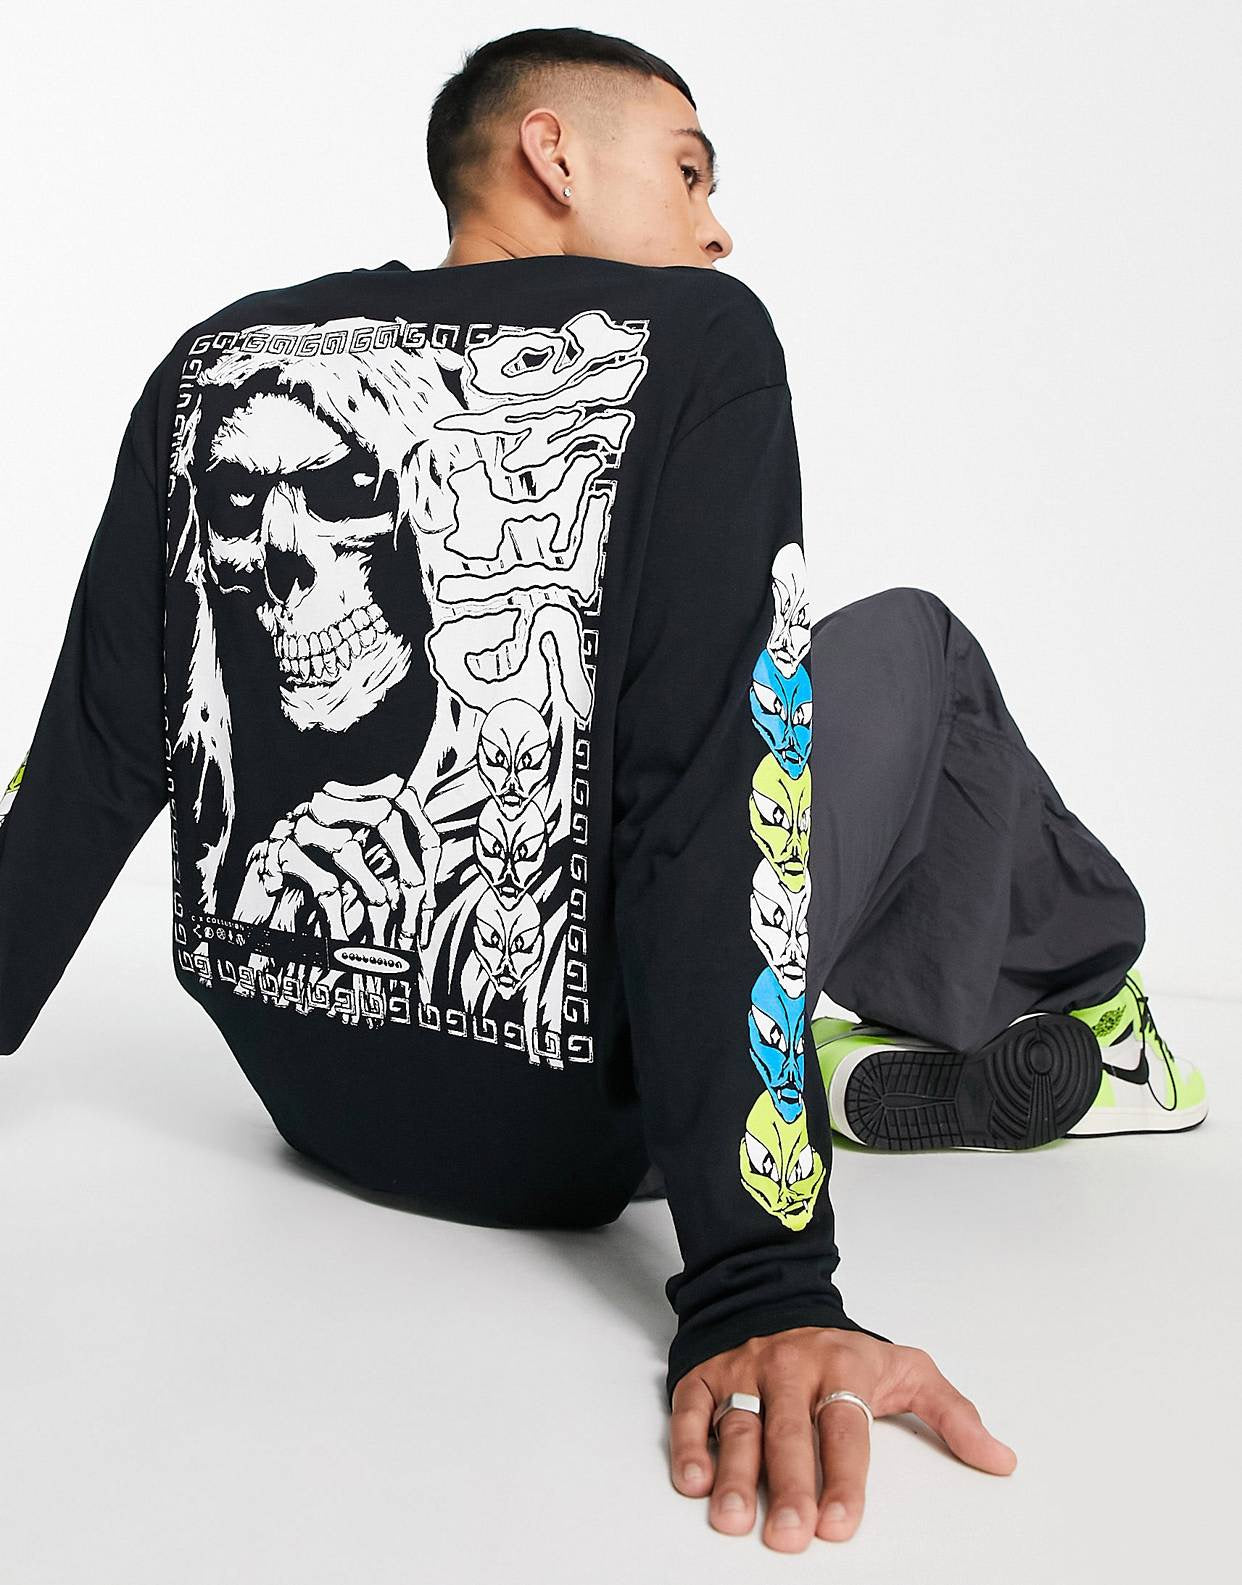 Collusion skull graphic long sleeve t-shirt in black